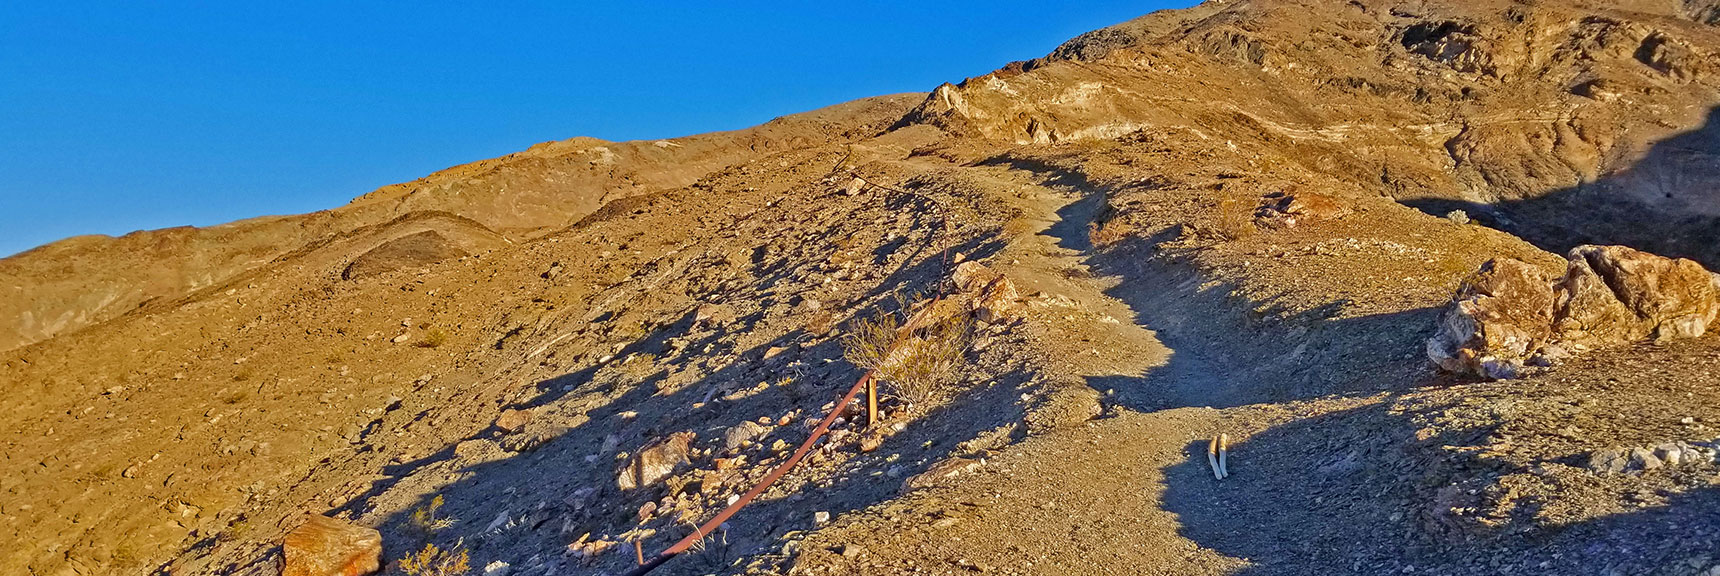 Trail Between Lower and Upper Stamp Mill | Keane Wonder Mine | Death Valley National Park, California